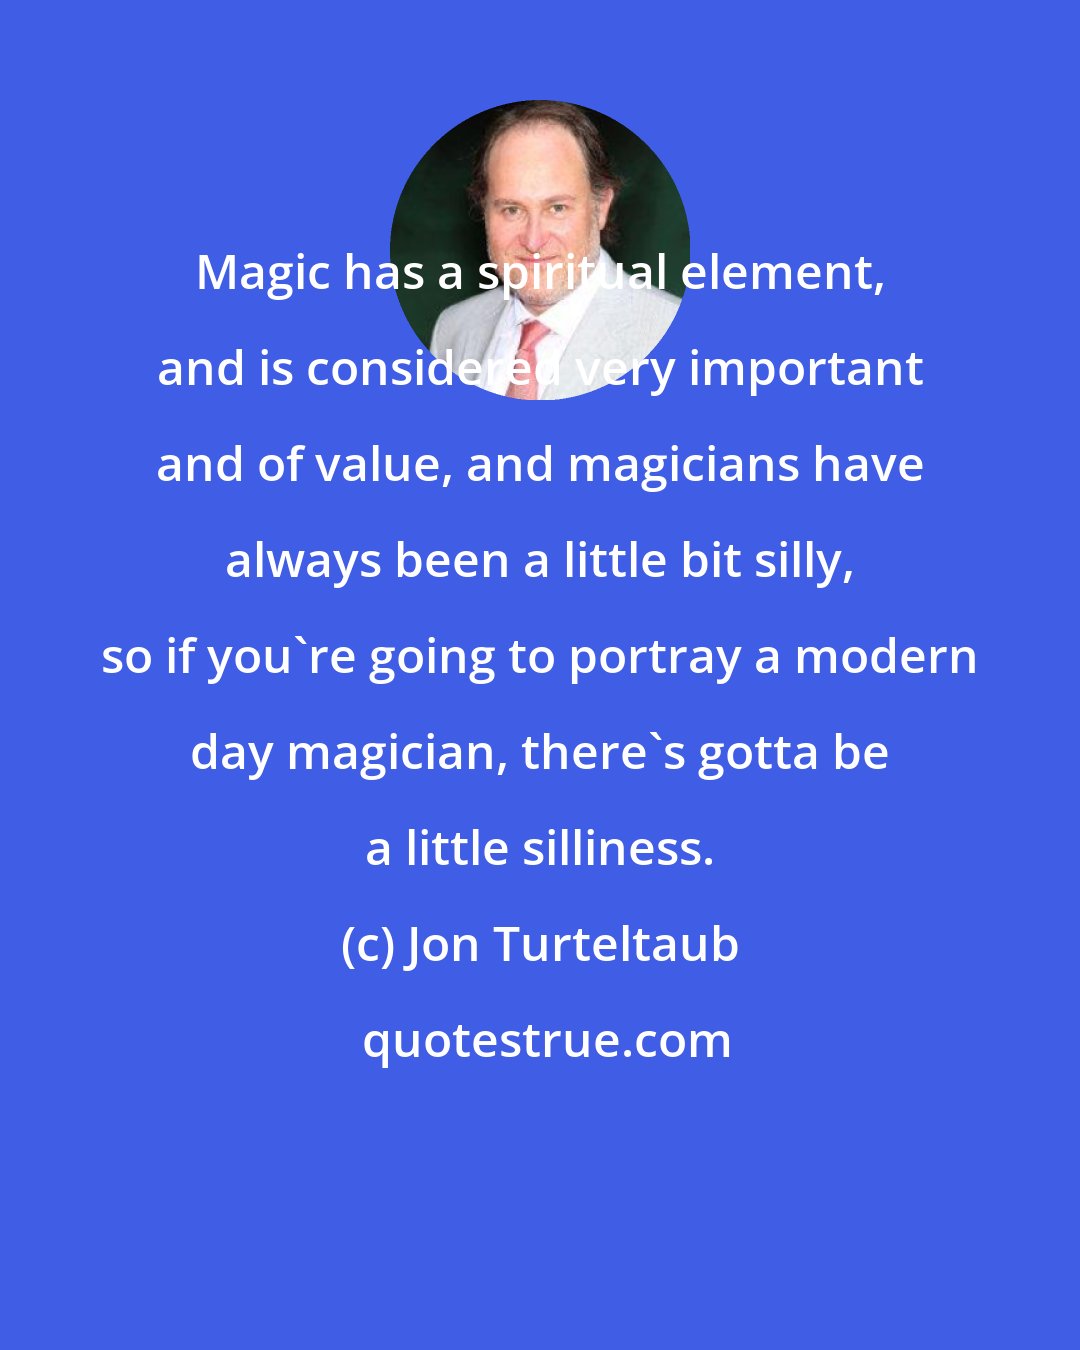 Jon Turteltaub: Magic has a spiritual element, and is considered very important and of value, and magicians have always been a little bit silly, so if you're going to portray a modern day magician, there's gotta be a little silliness.